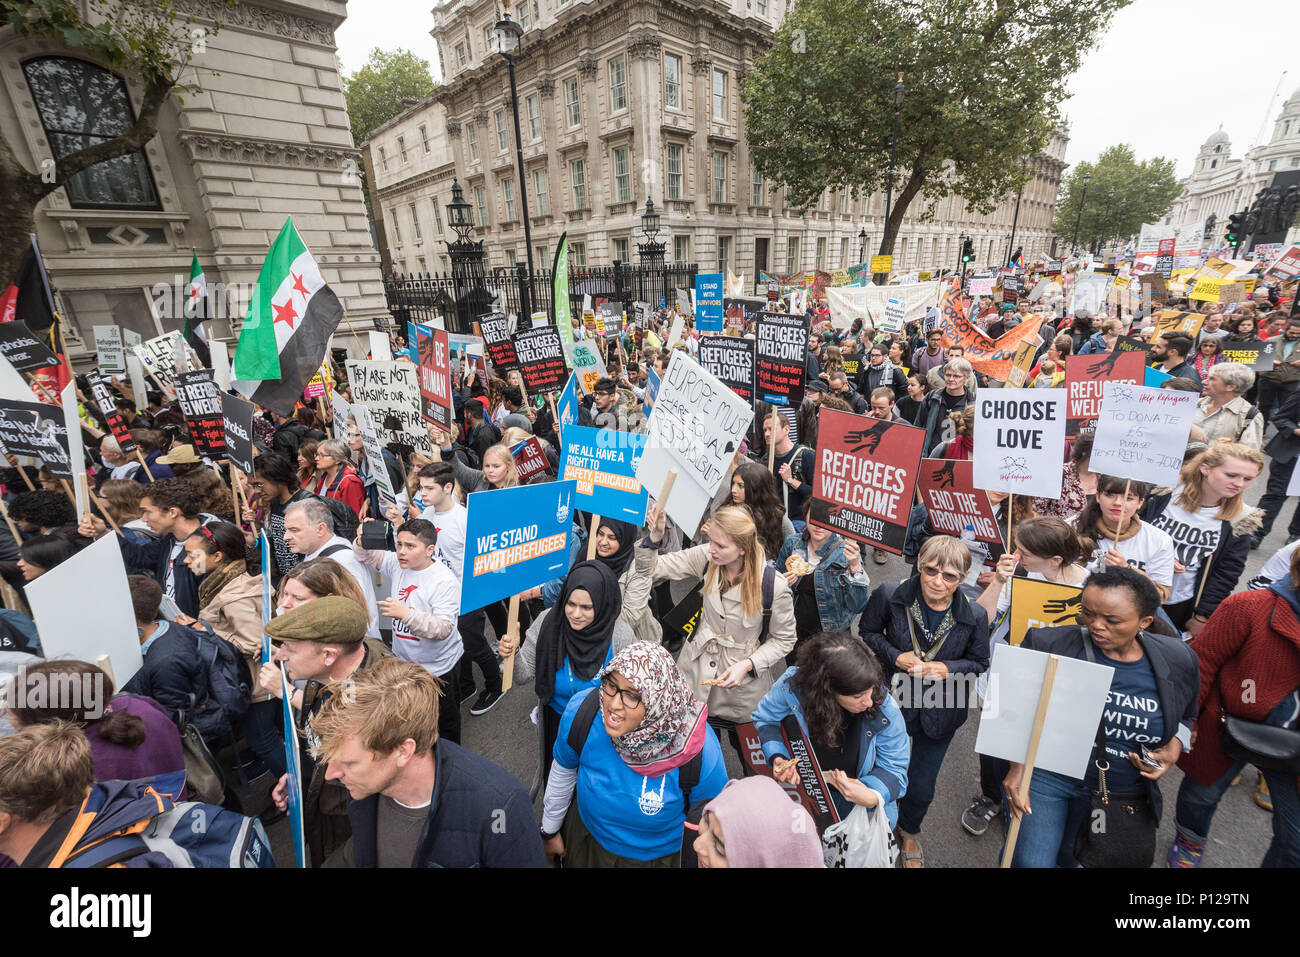 London, September 17th 2016. Several thousand protesters take to the streets of central London to support refugees coming to the UK. Beginning at Park Stock Photo